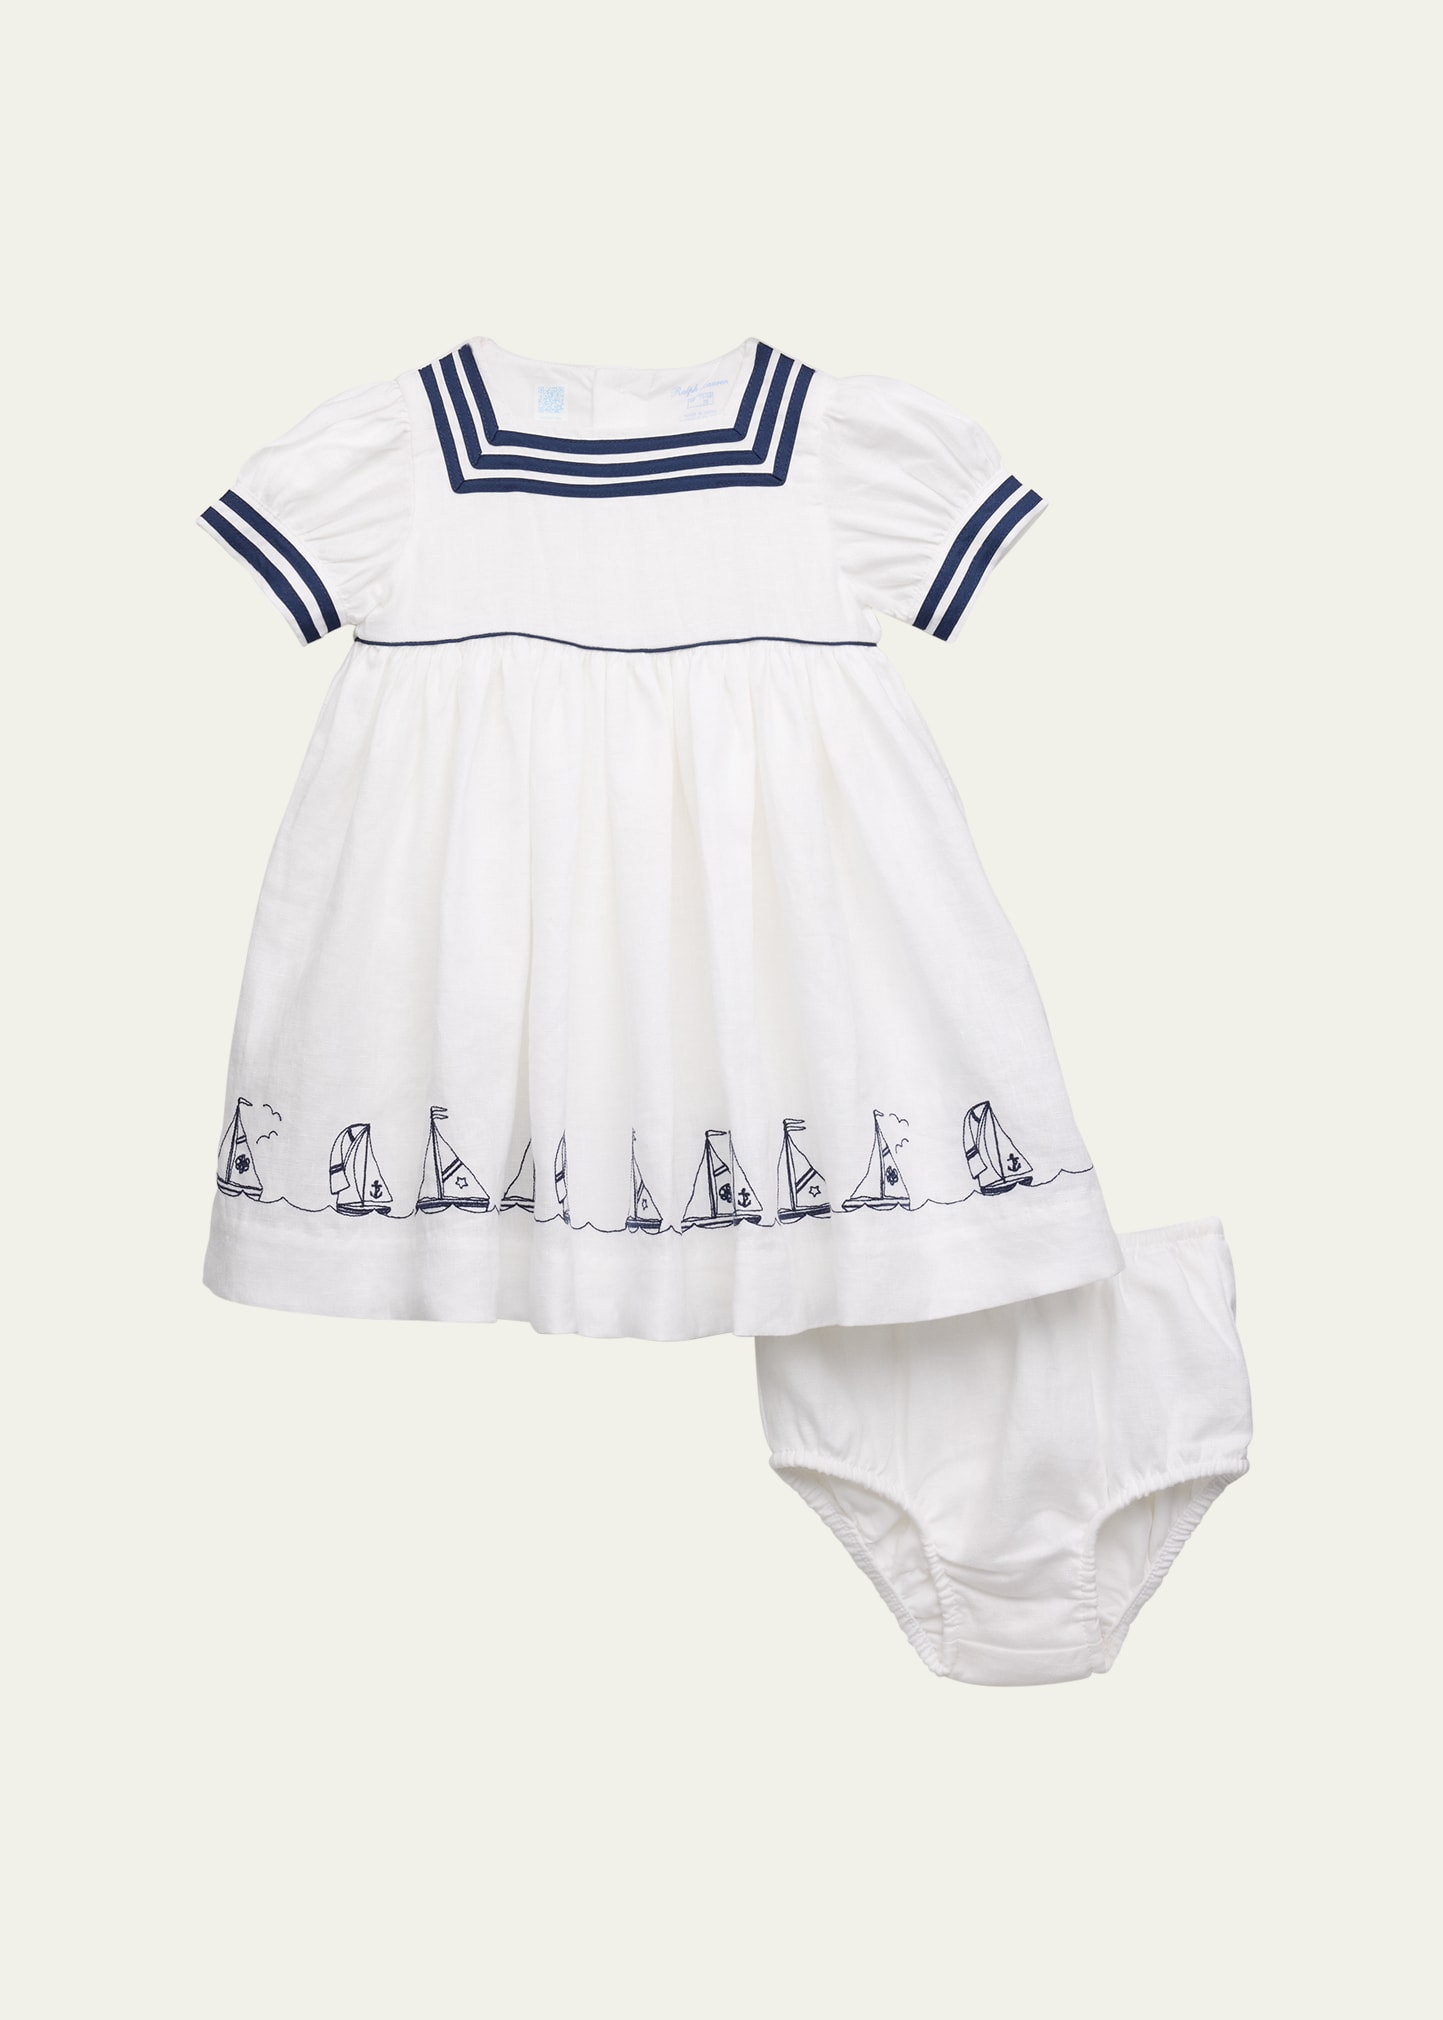 Girl's Sailor Inspired Linen Dress W/ Bloomers, Size 9M-24M